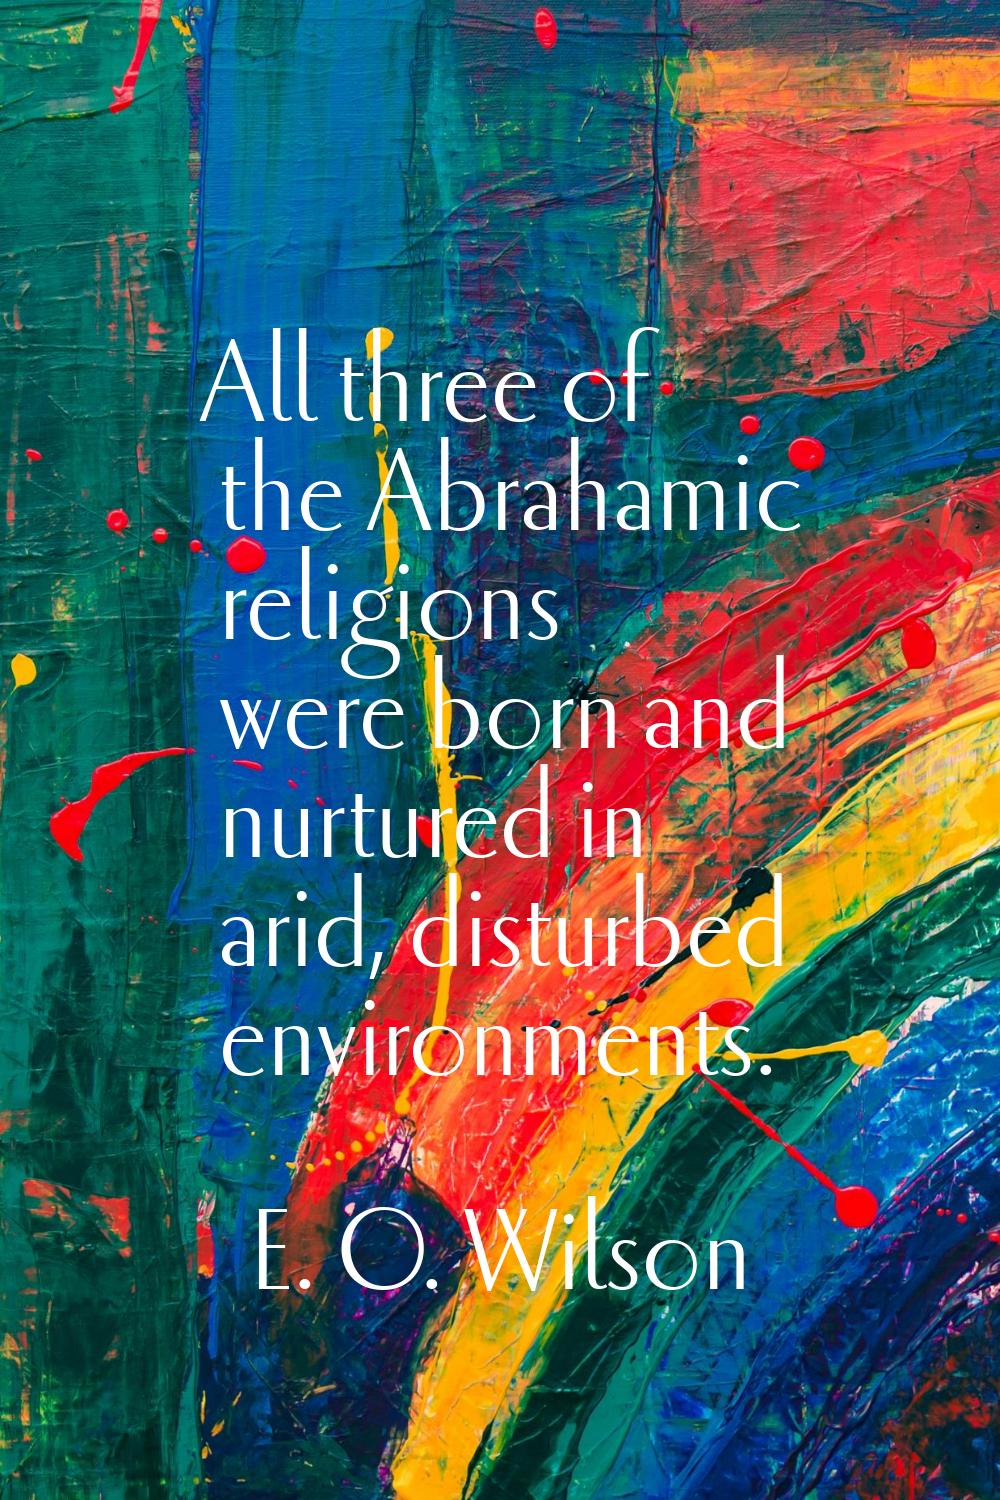 All three of the Abrahamic religions were born and nurtured in arid, disturbed environments.